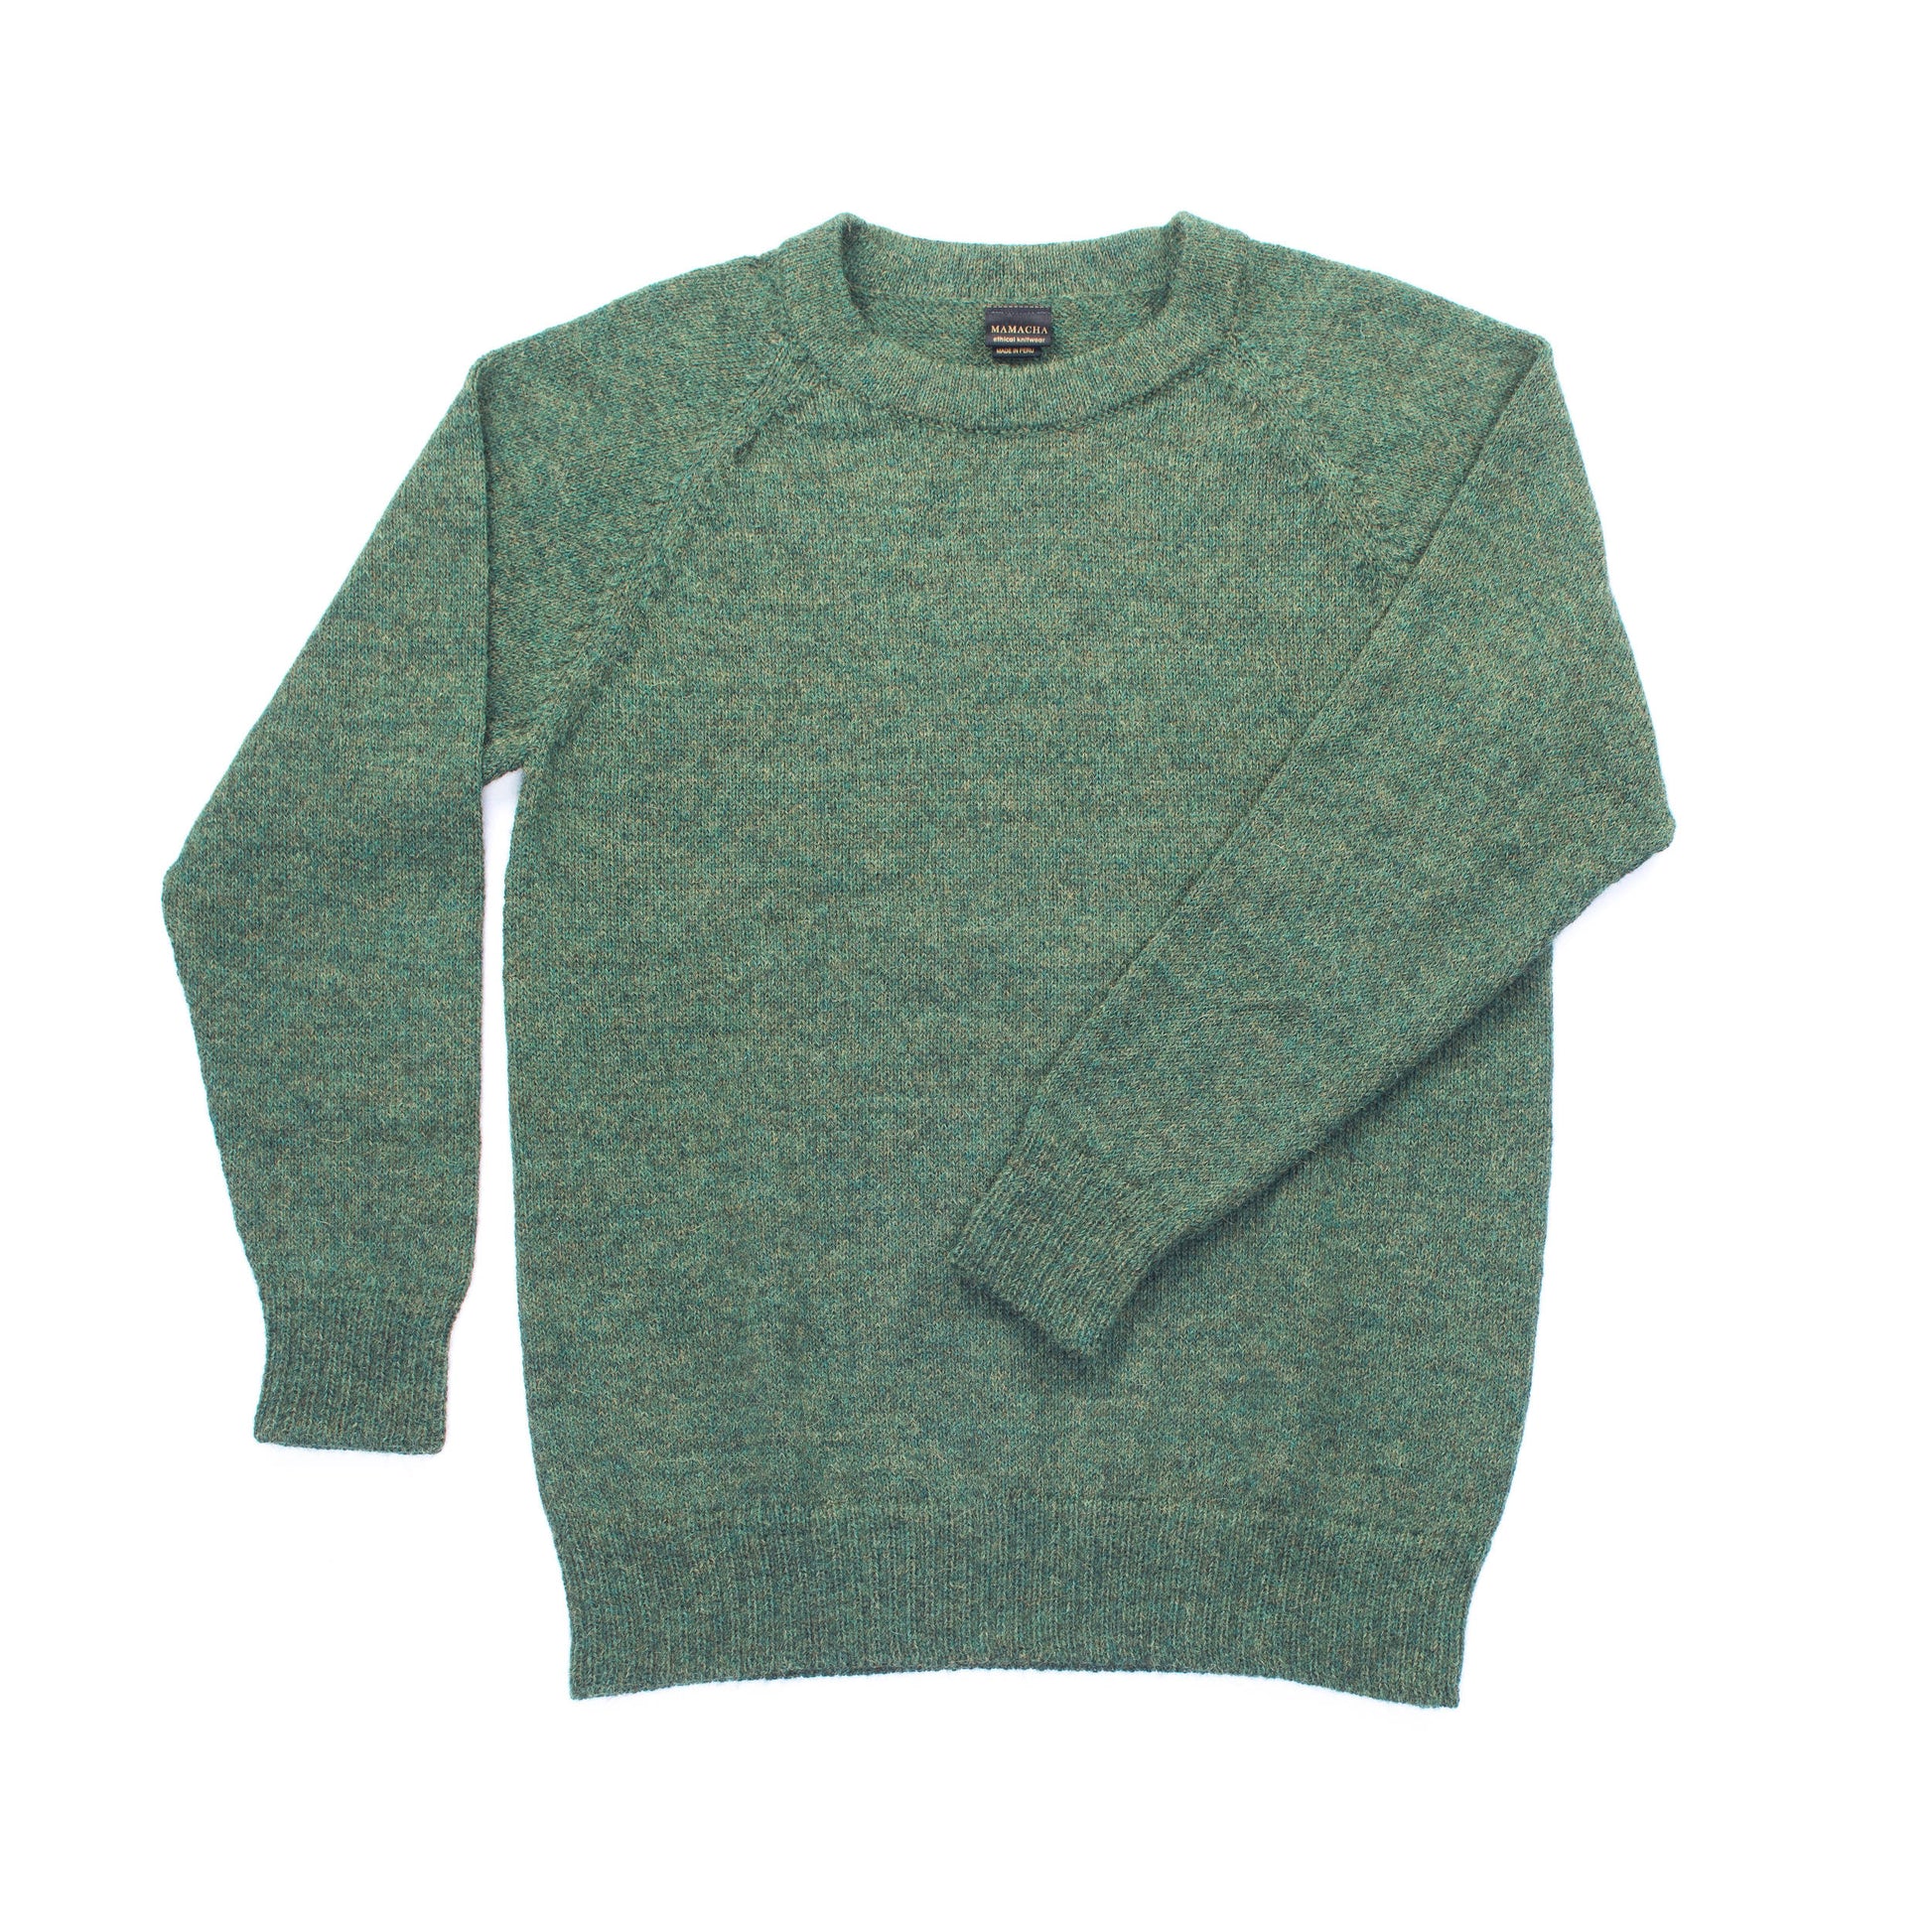 Alpaca wool sweater, 100% Alpaca. Knitted round neck jumper. Crew neck knit jersey. Pullover, natural fibre, ethical. PLASTIC FREE.